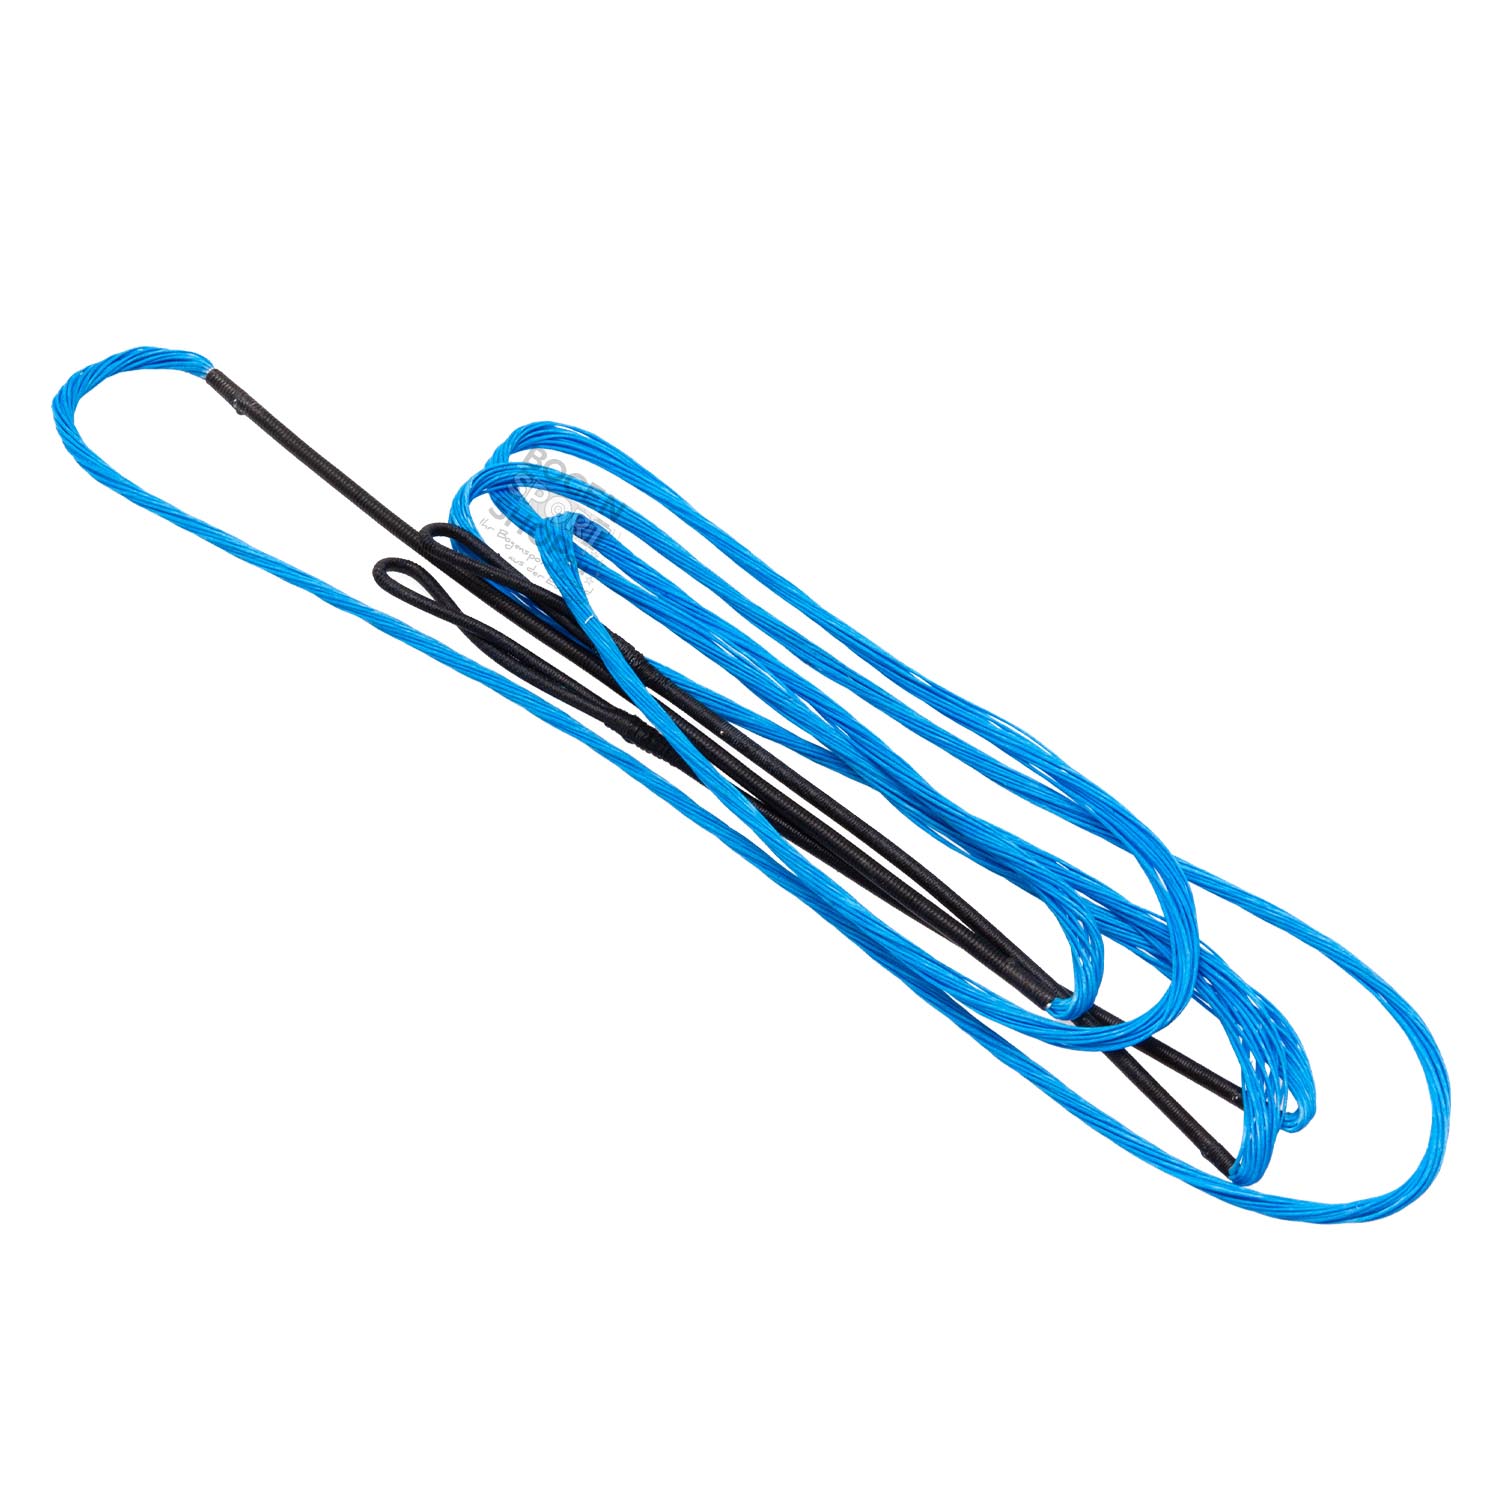  Buy GAS Bowstrings Recurve String 8125 Electric Blue  online